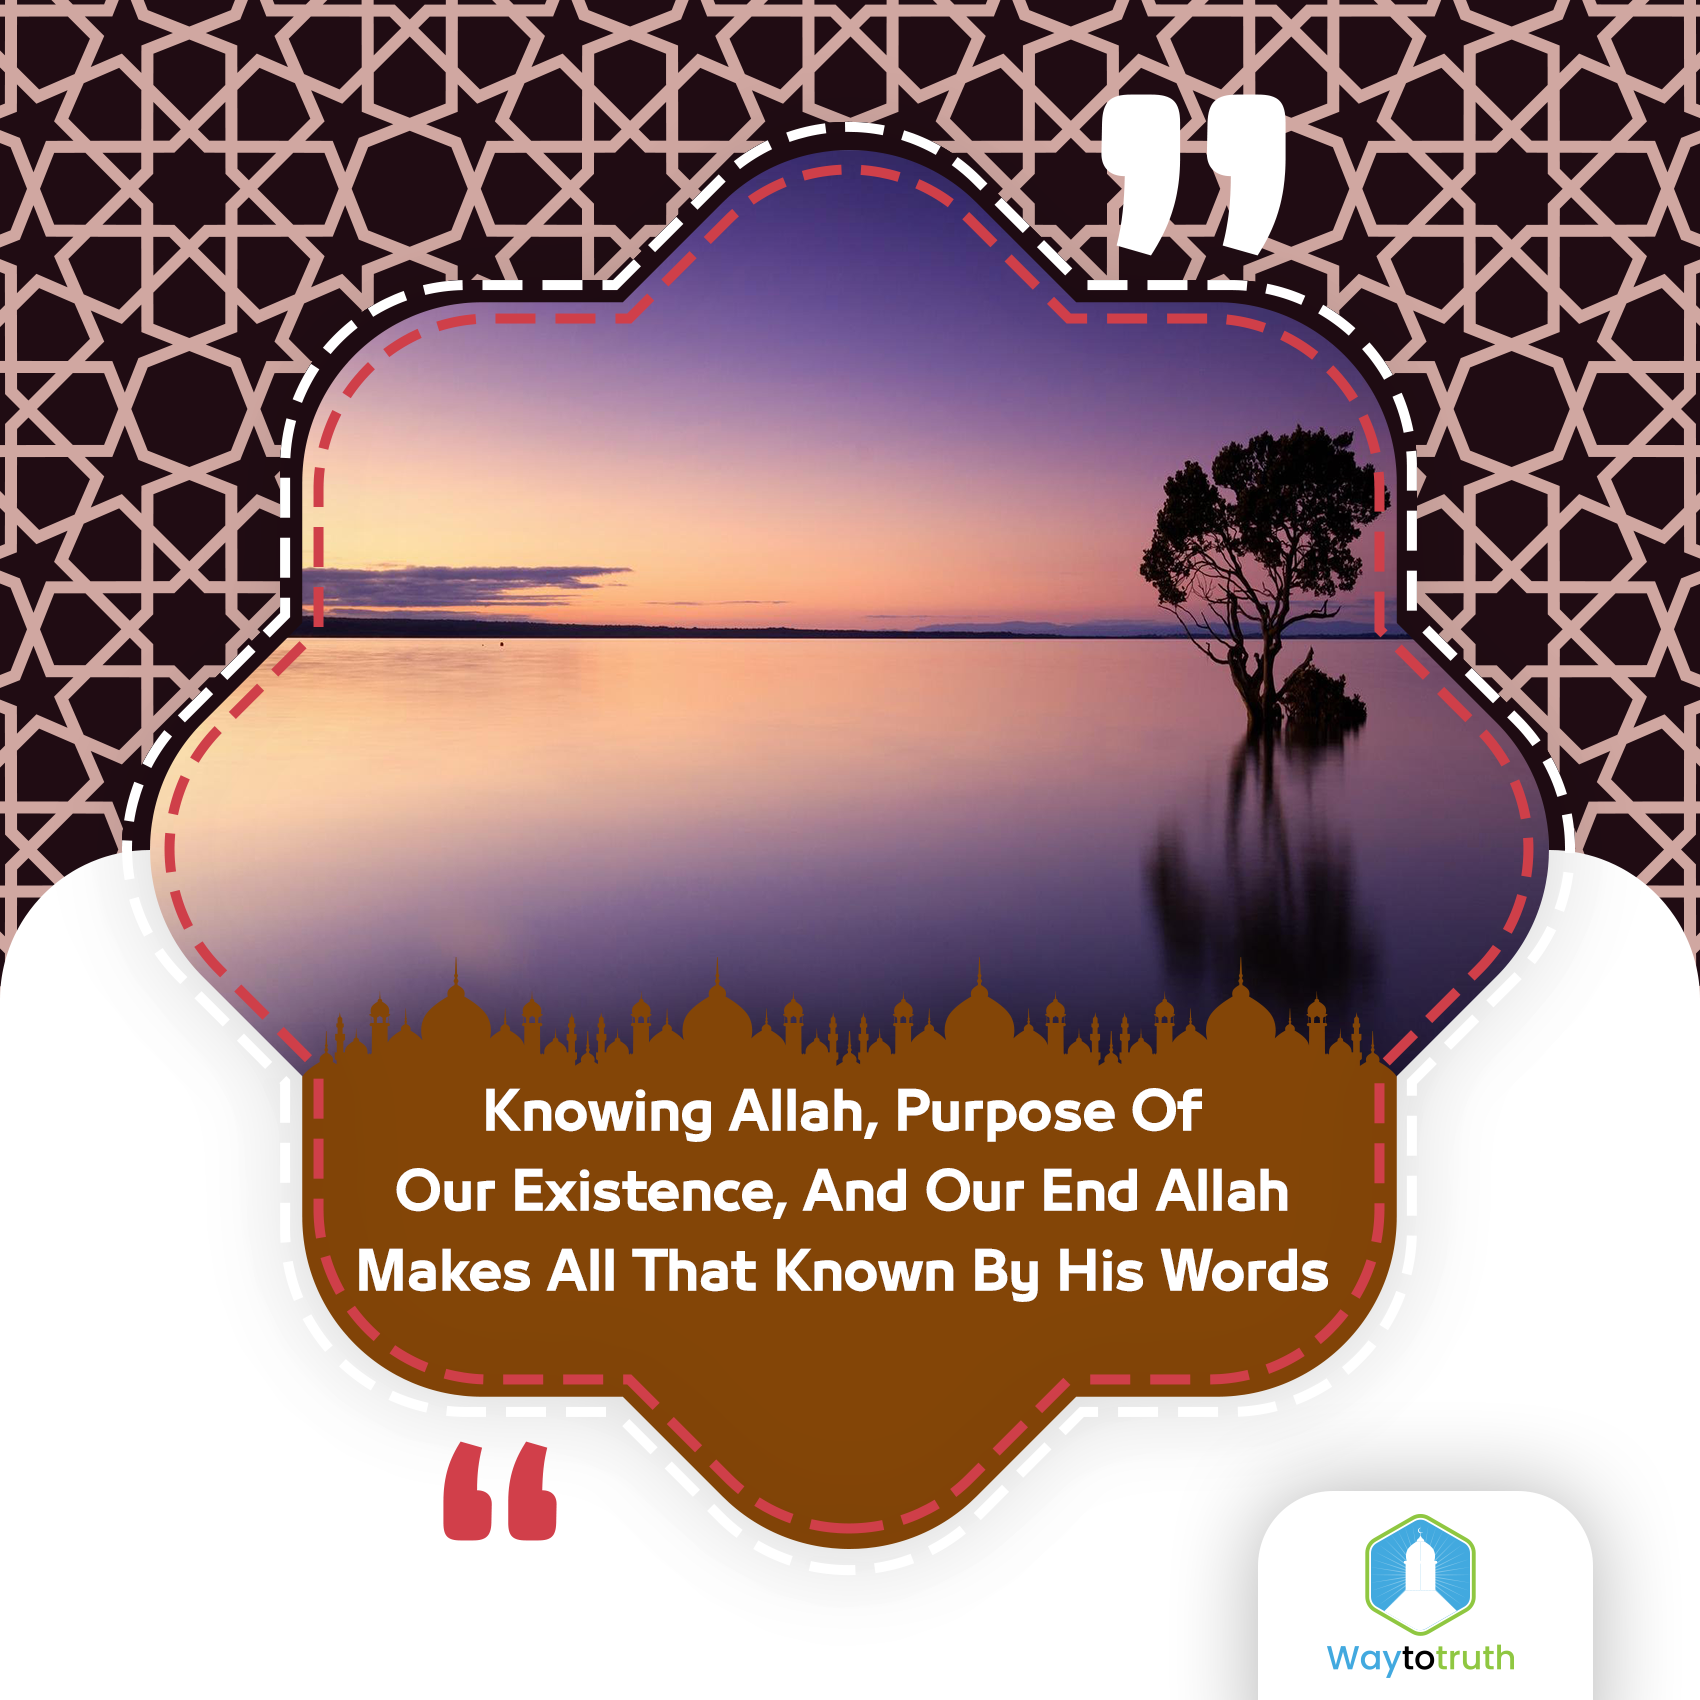 Knowing Allah, Purpose of Our Existence, and Our End Allah Makes All That Known by His Words